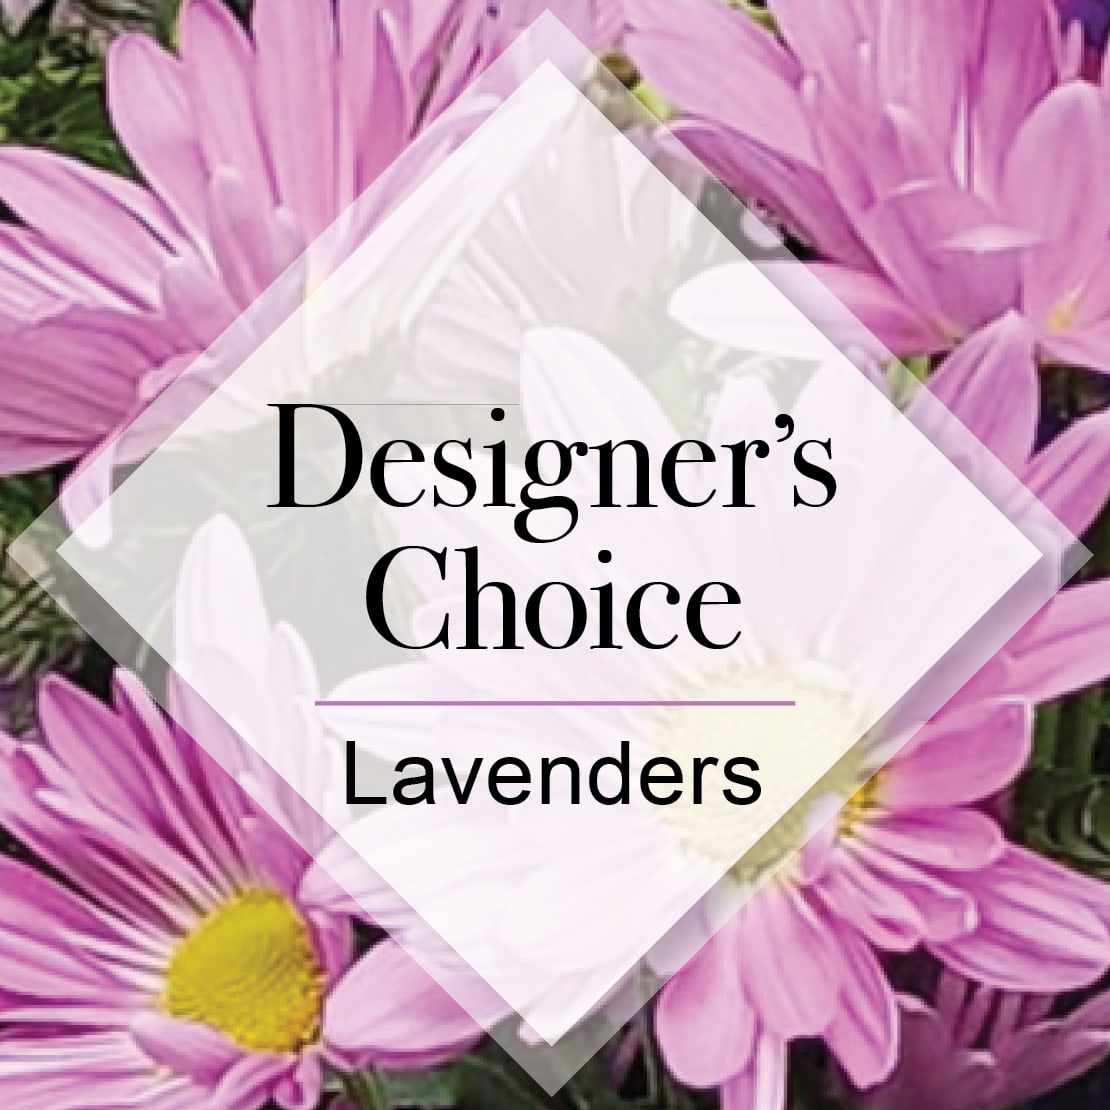 Designers Choice Lavender - A selection that will be predominately the color that you have chosen with accents and greenery to compliment. The designers have the flexibility to create something unique and beautiful for you and is often the best value for you. If you have specifics you would like to request please include in the comments / special instructions area when placing your order.